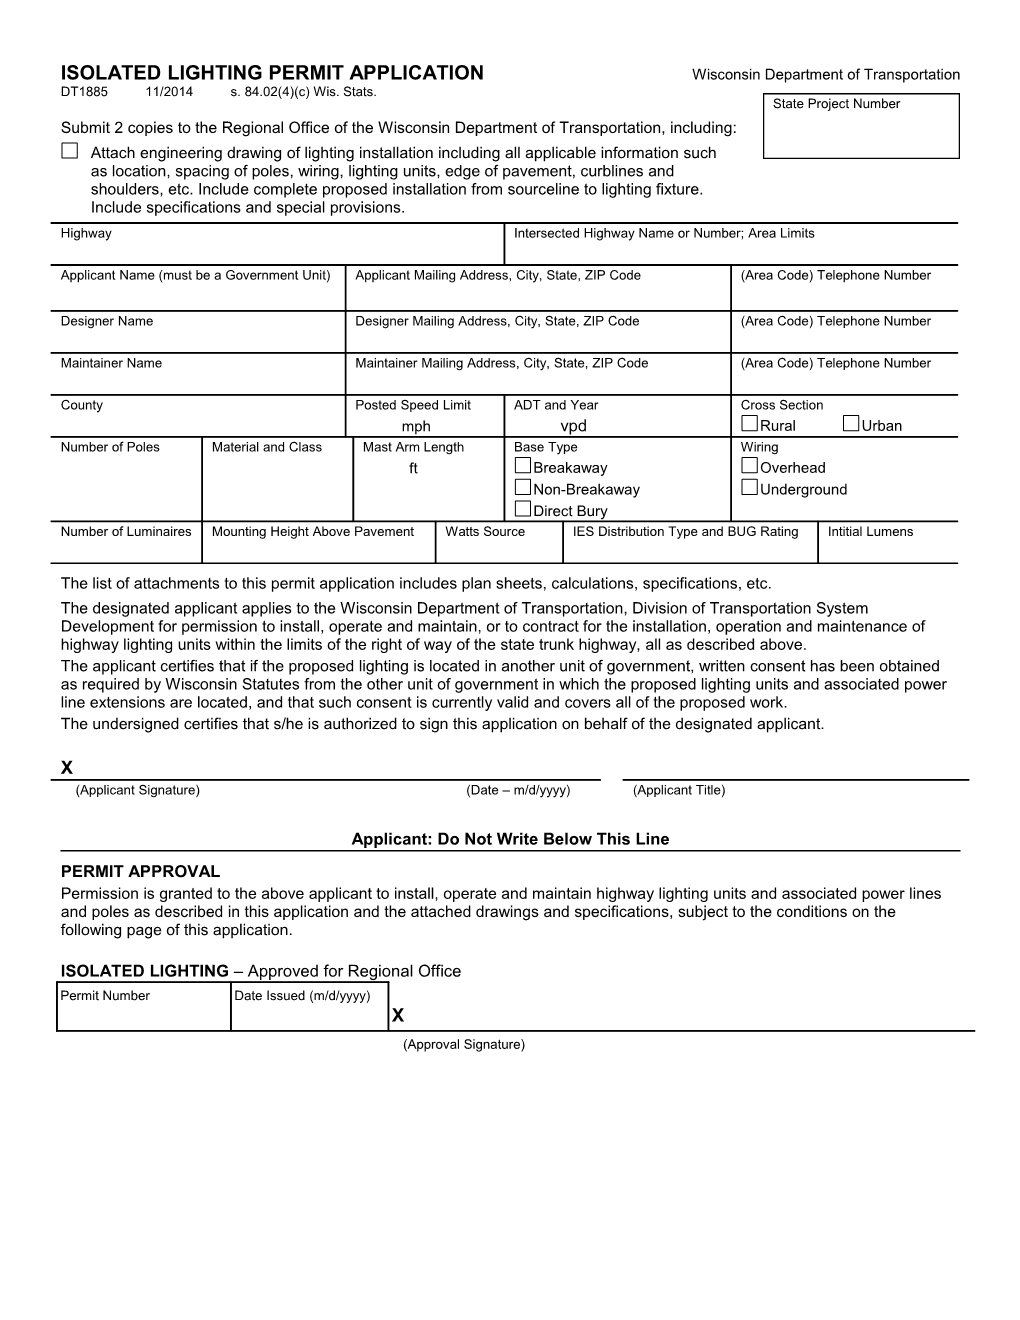 DT1885 Isolated Lighting Permit Application